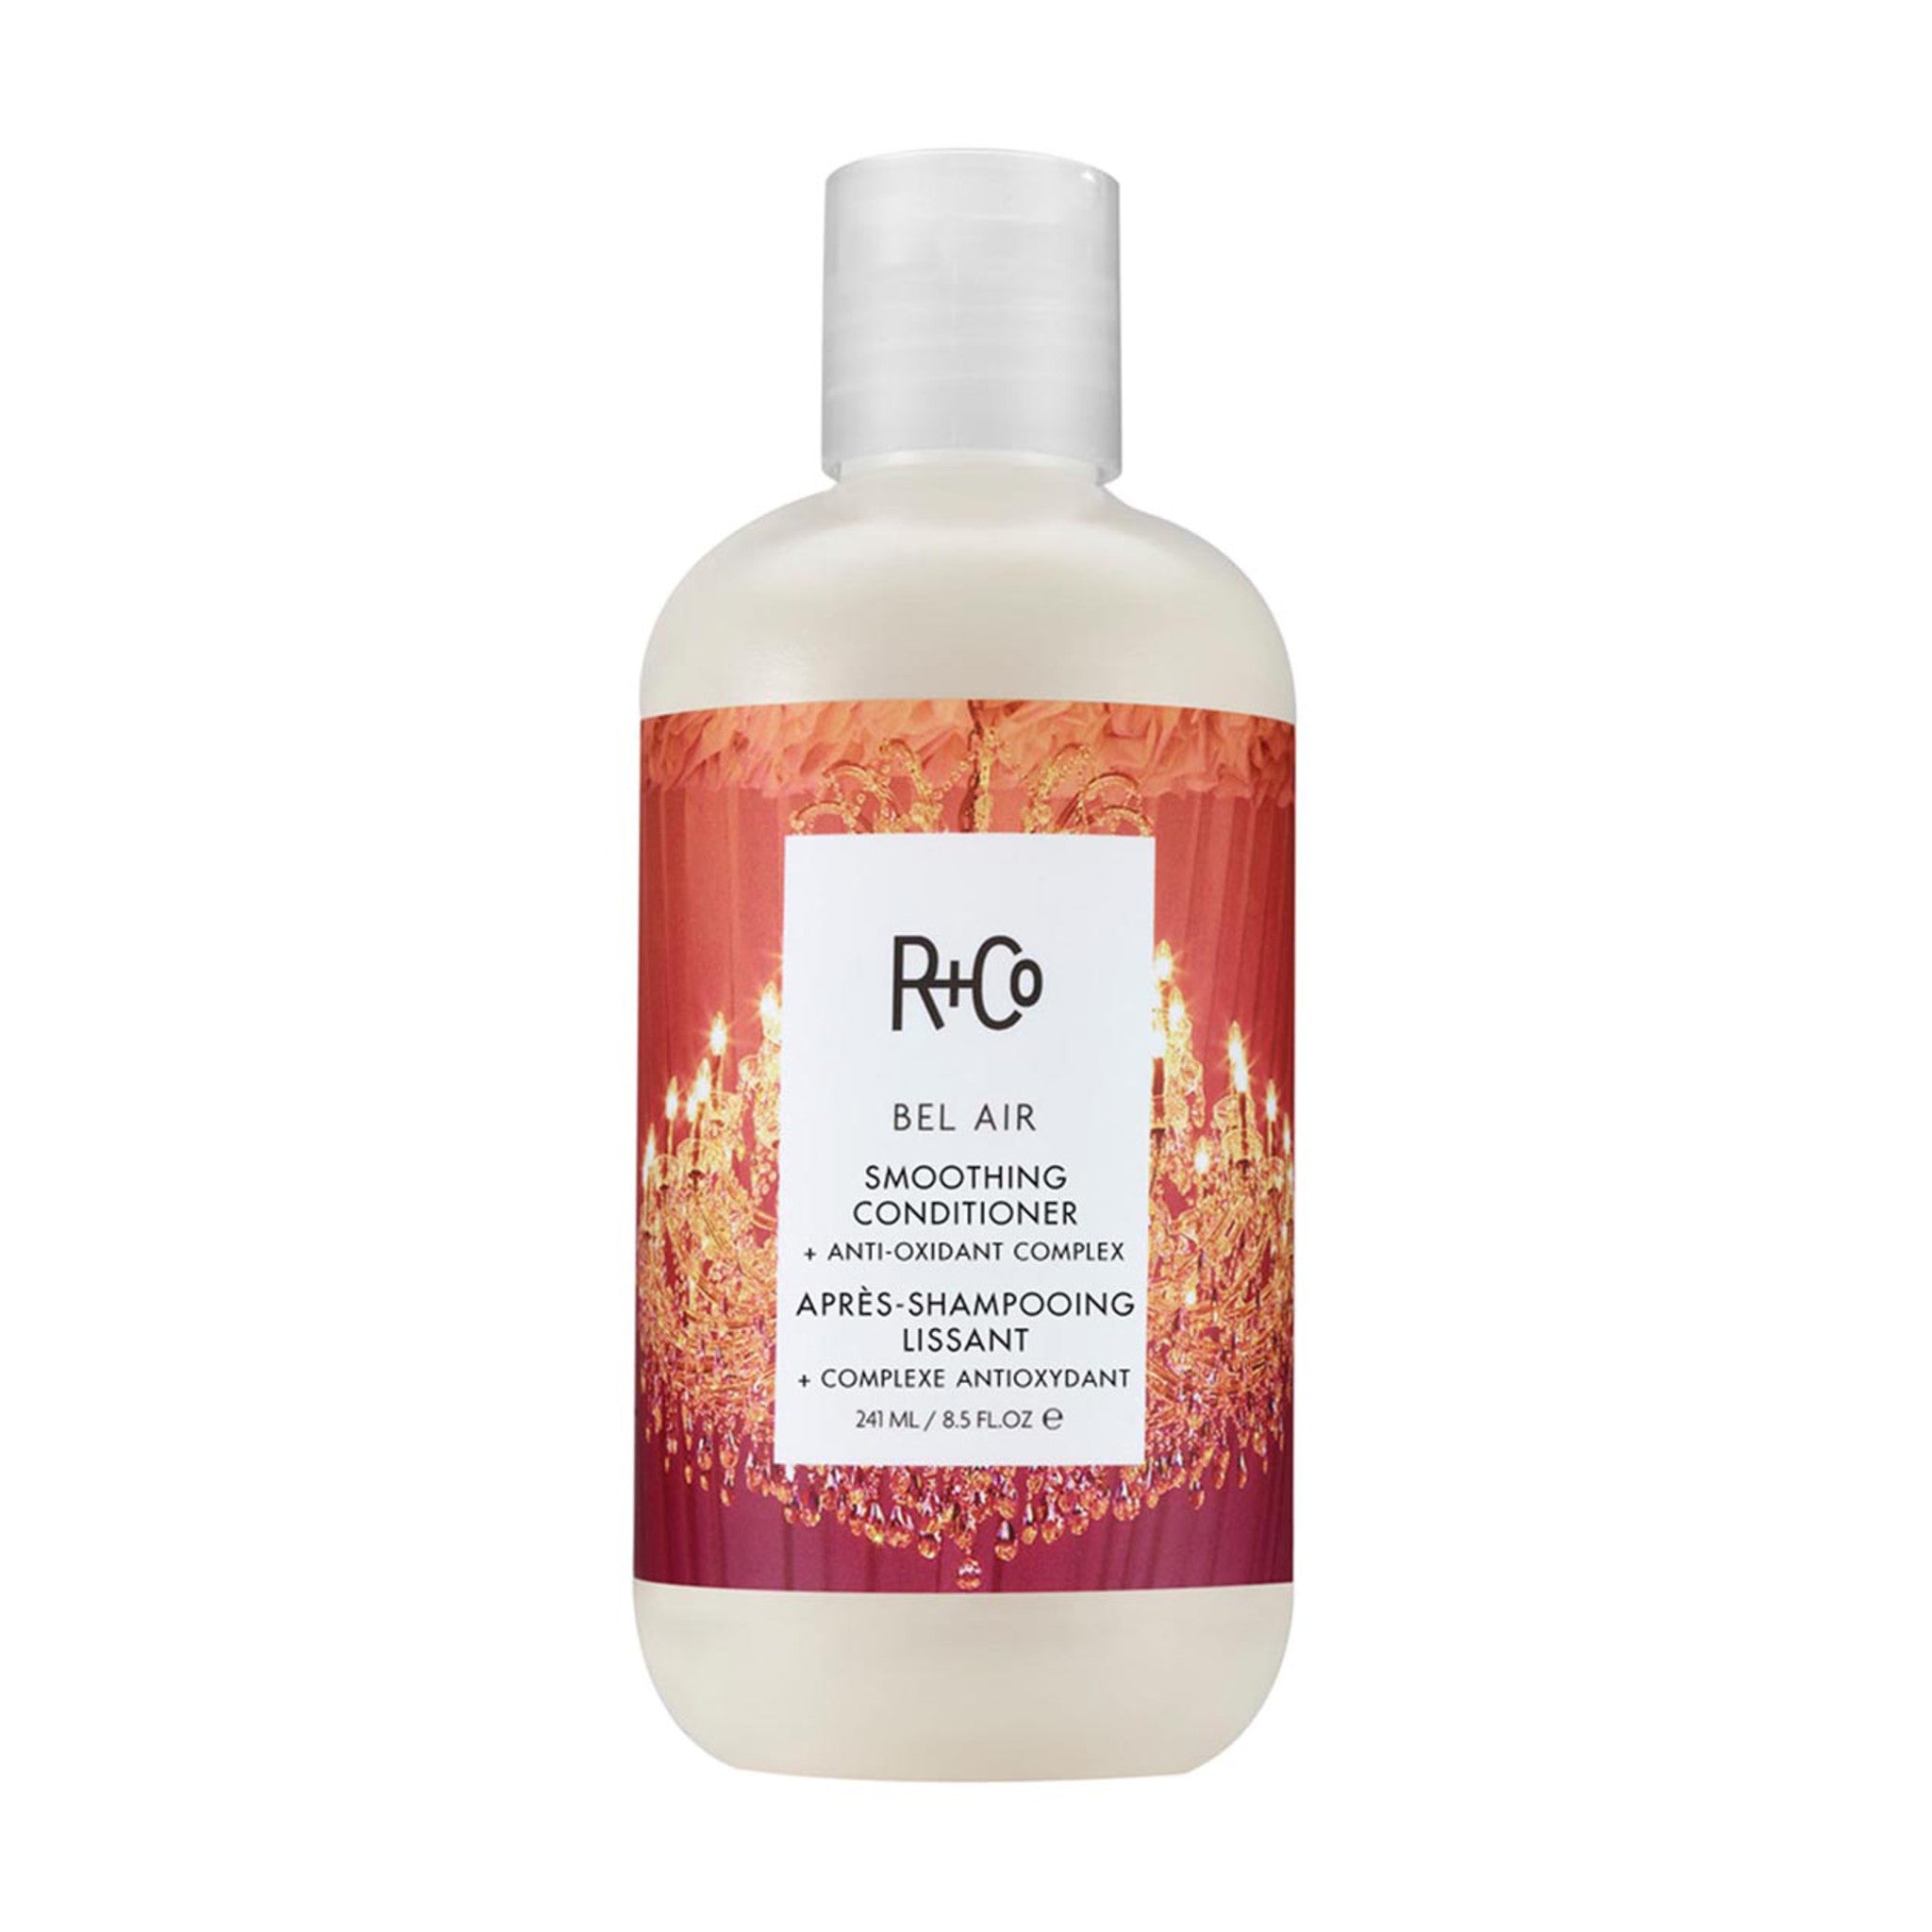 R+Co Bel Air Smoothing Conditioner and Anti-Oxidant Complex Size variant: main image.